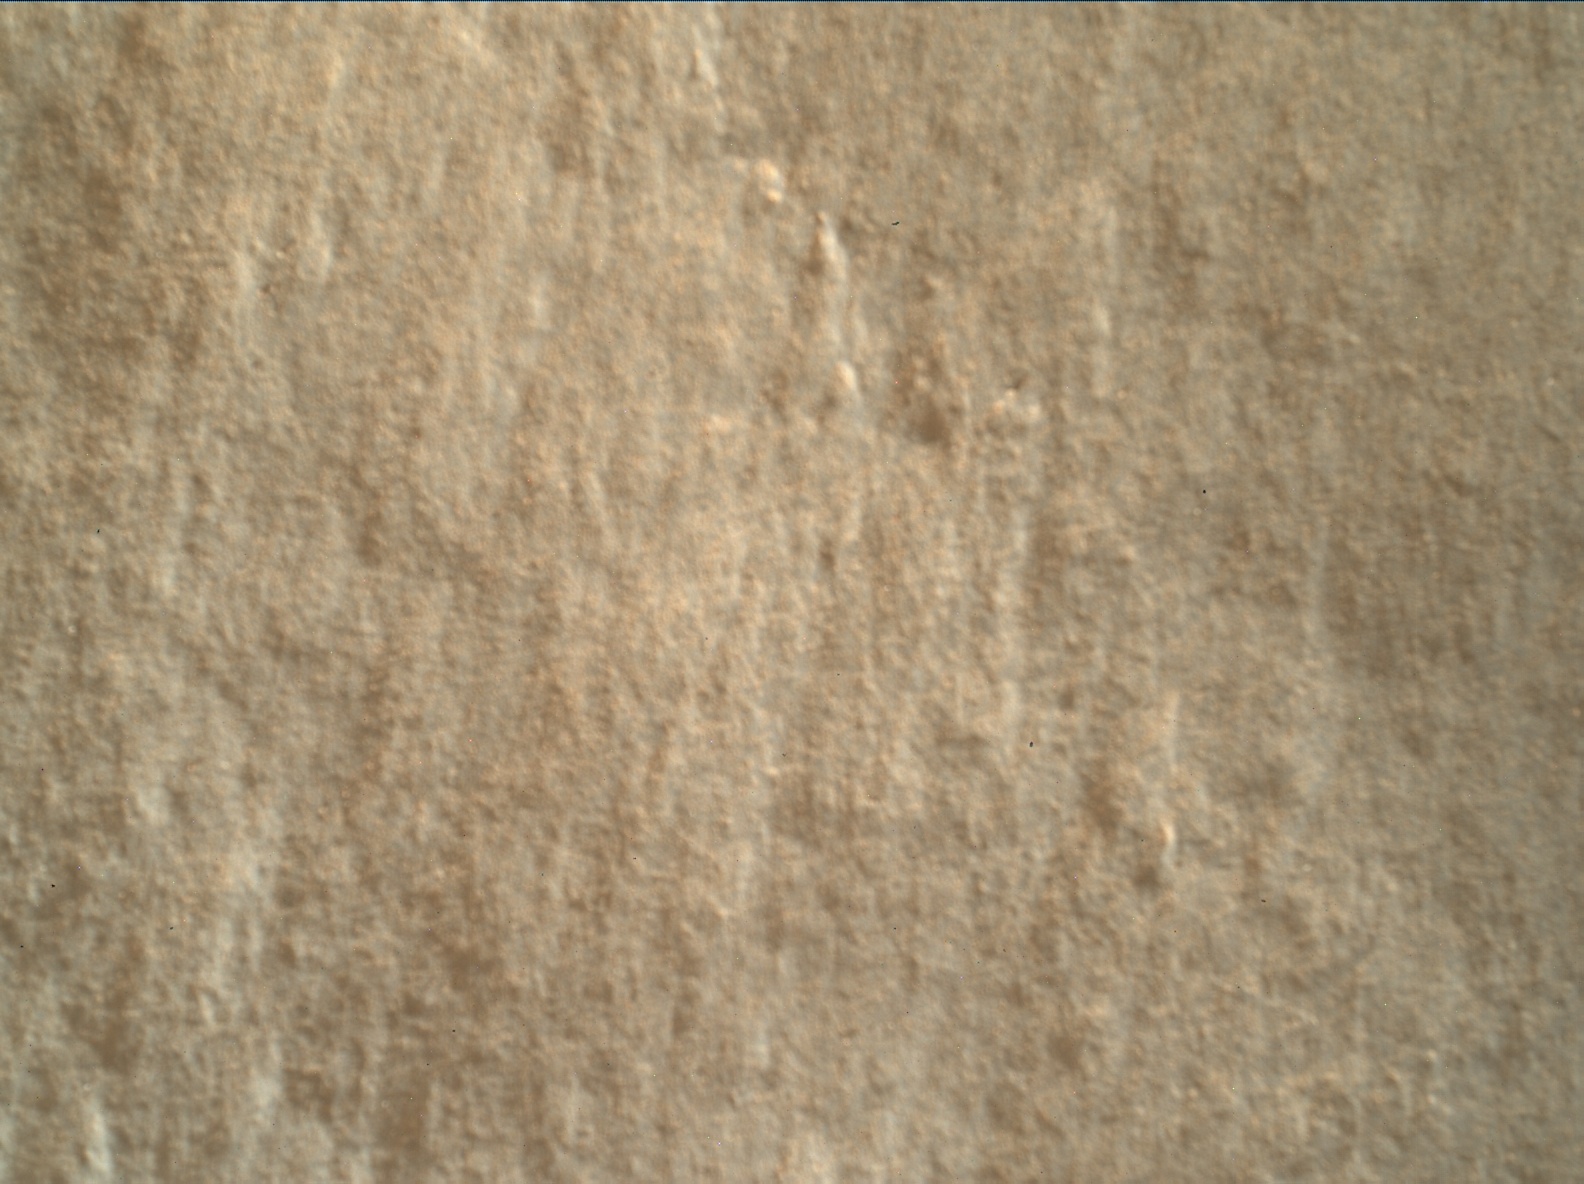 Nasa's Mars rover Curiosity acquired this image using its Mars Hand Lens Imager (MAHLI) on Sol 3421